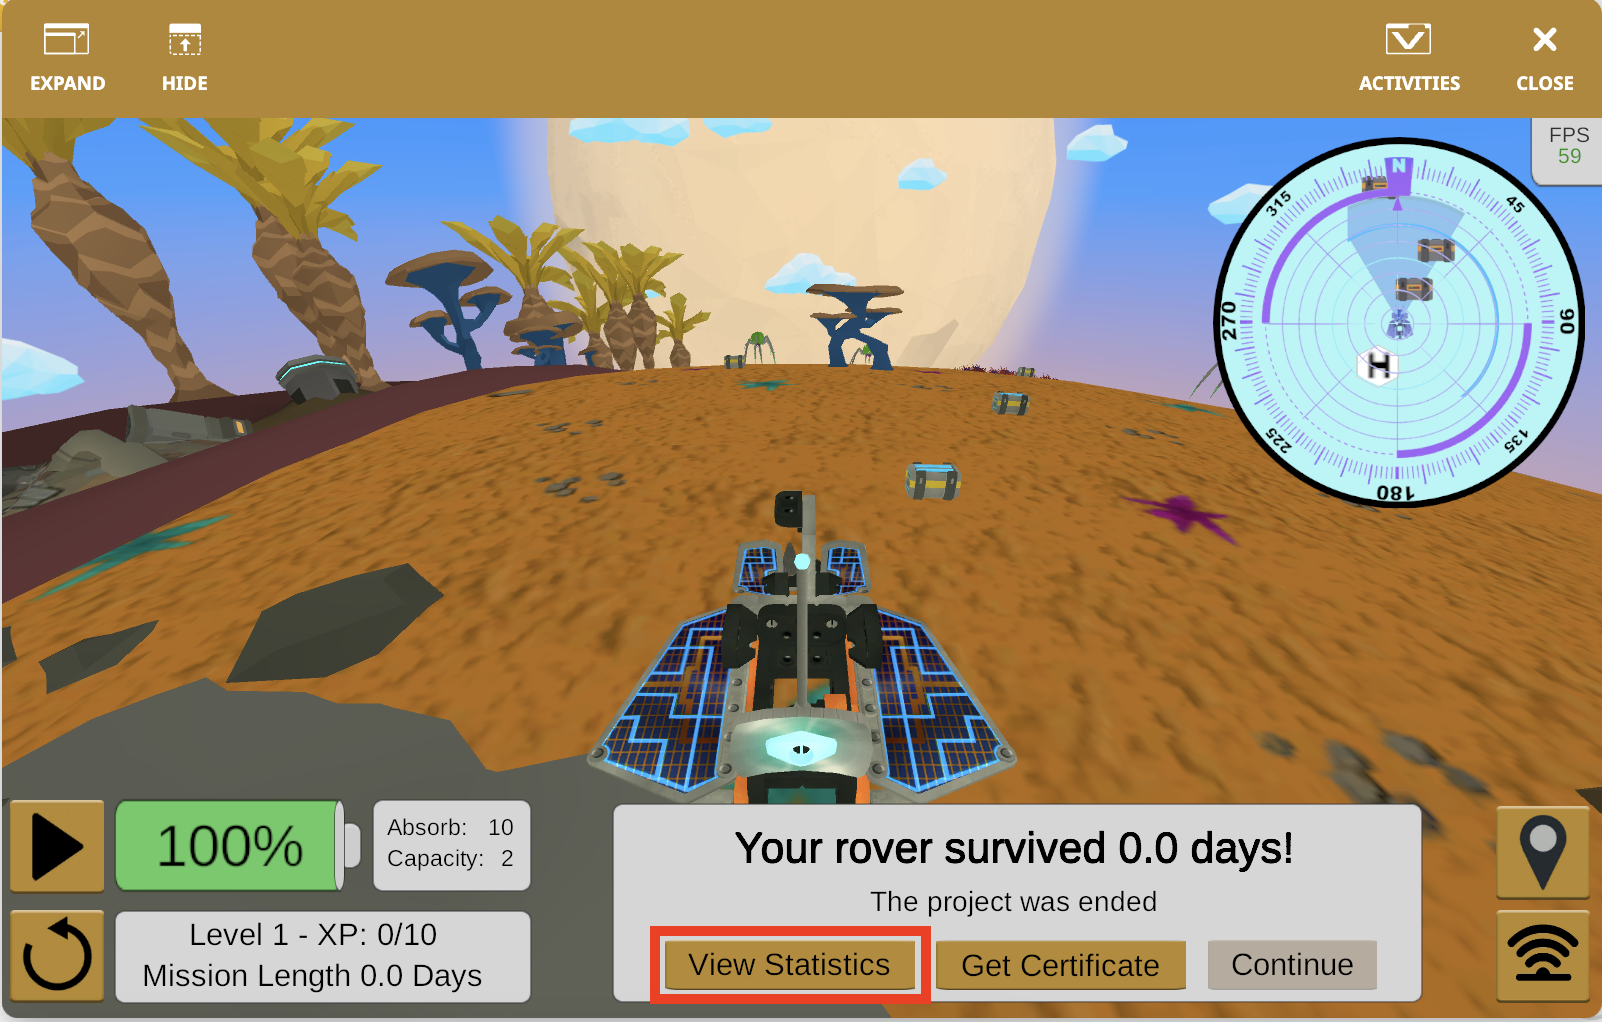 Rescue_Rover_View_Stats.png